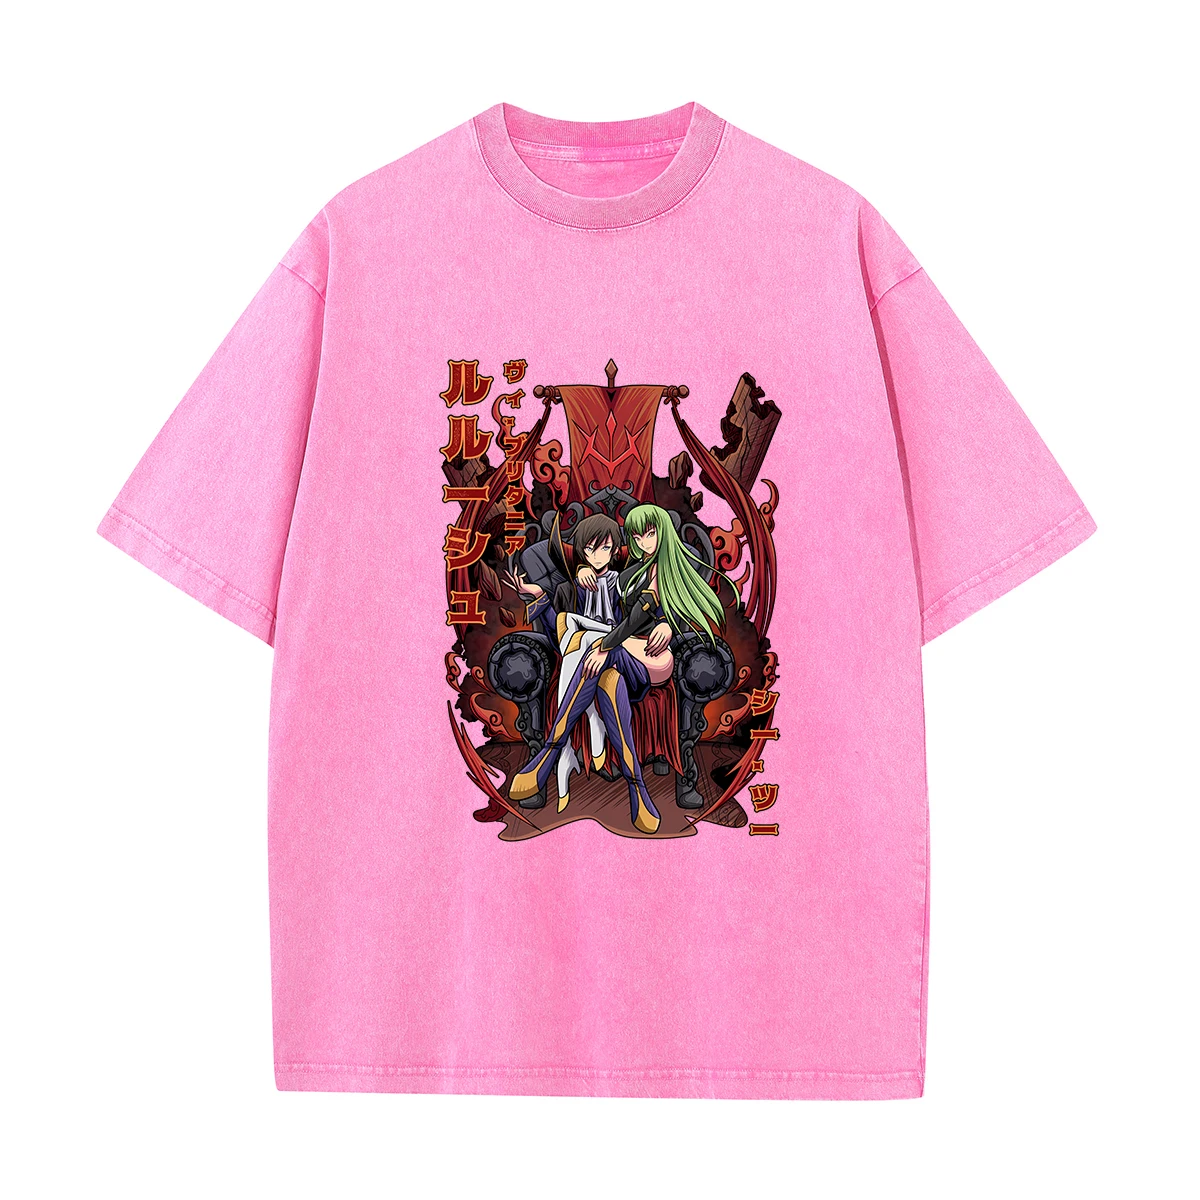 

Anime Code Geass T Shirt Men Hip Hop Vintage Washed Oversized Y2K T Shirts for Women Streetwear Tees Unisex Summer Clothing